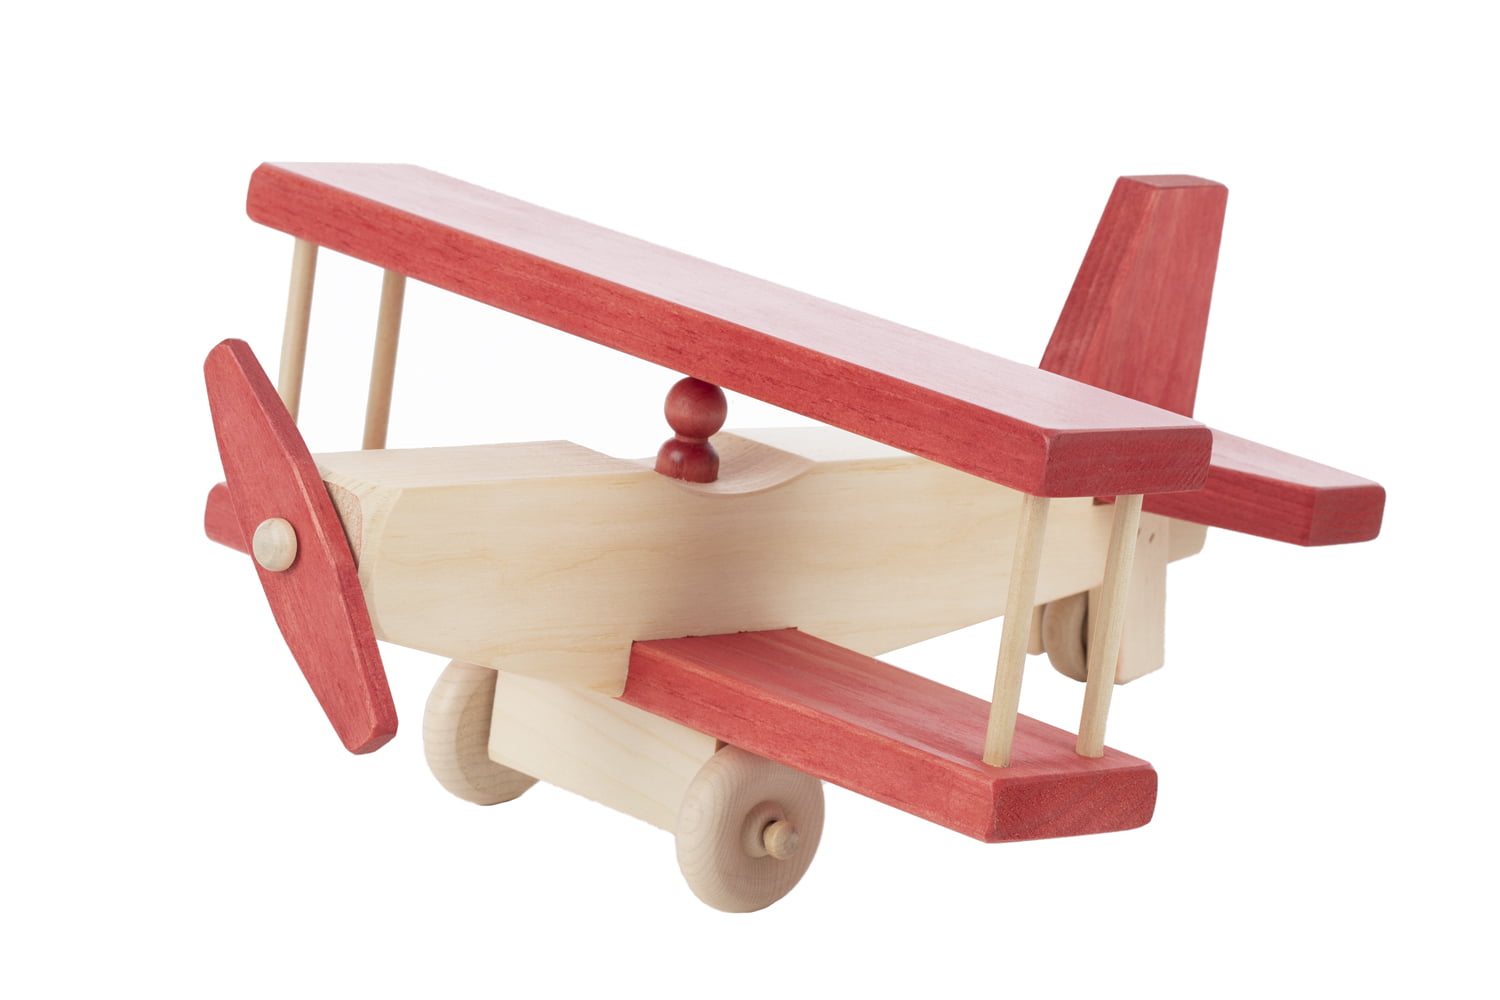 Child’s Wooden Maple Airplane – Amish Crafted